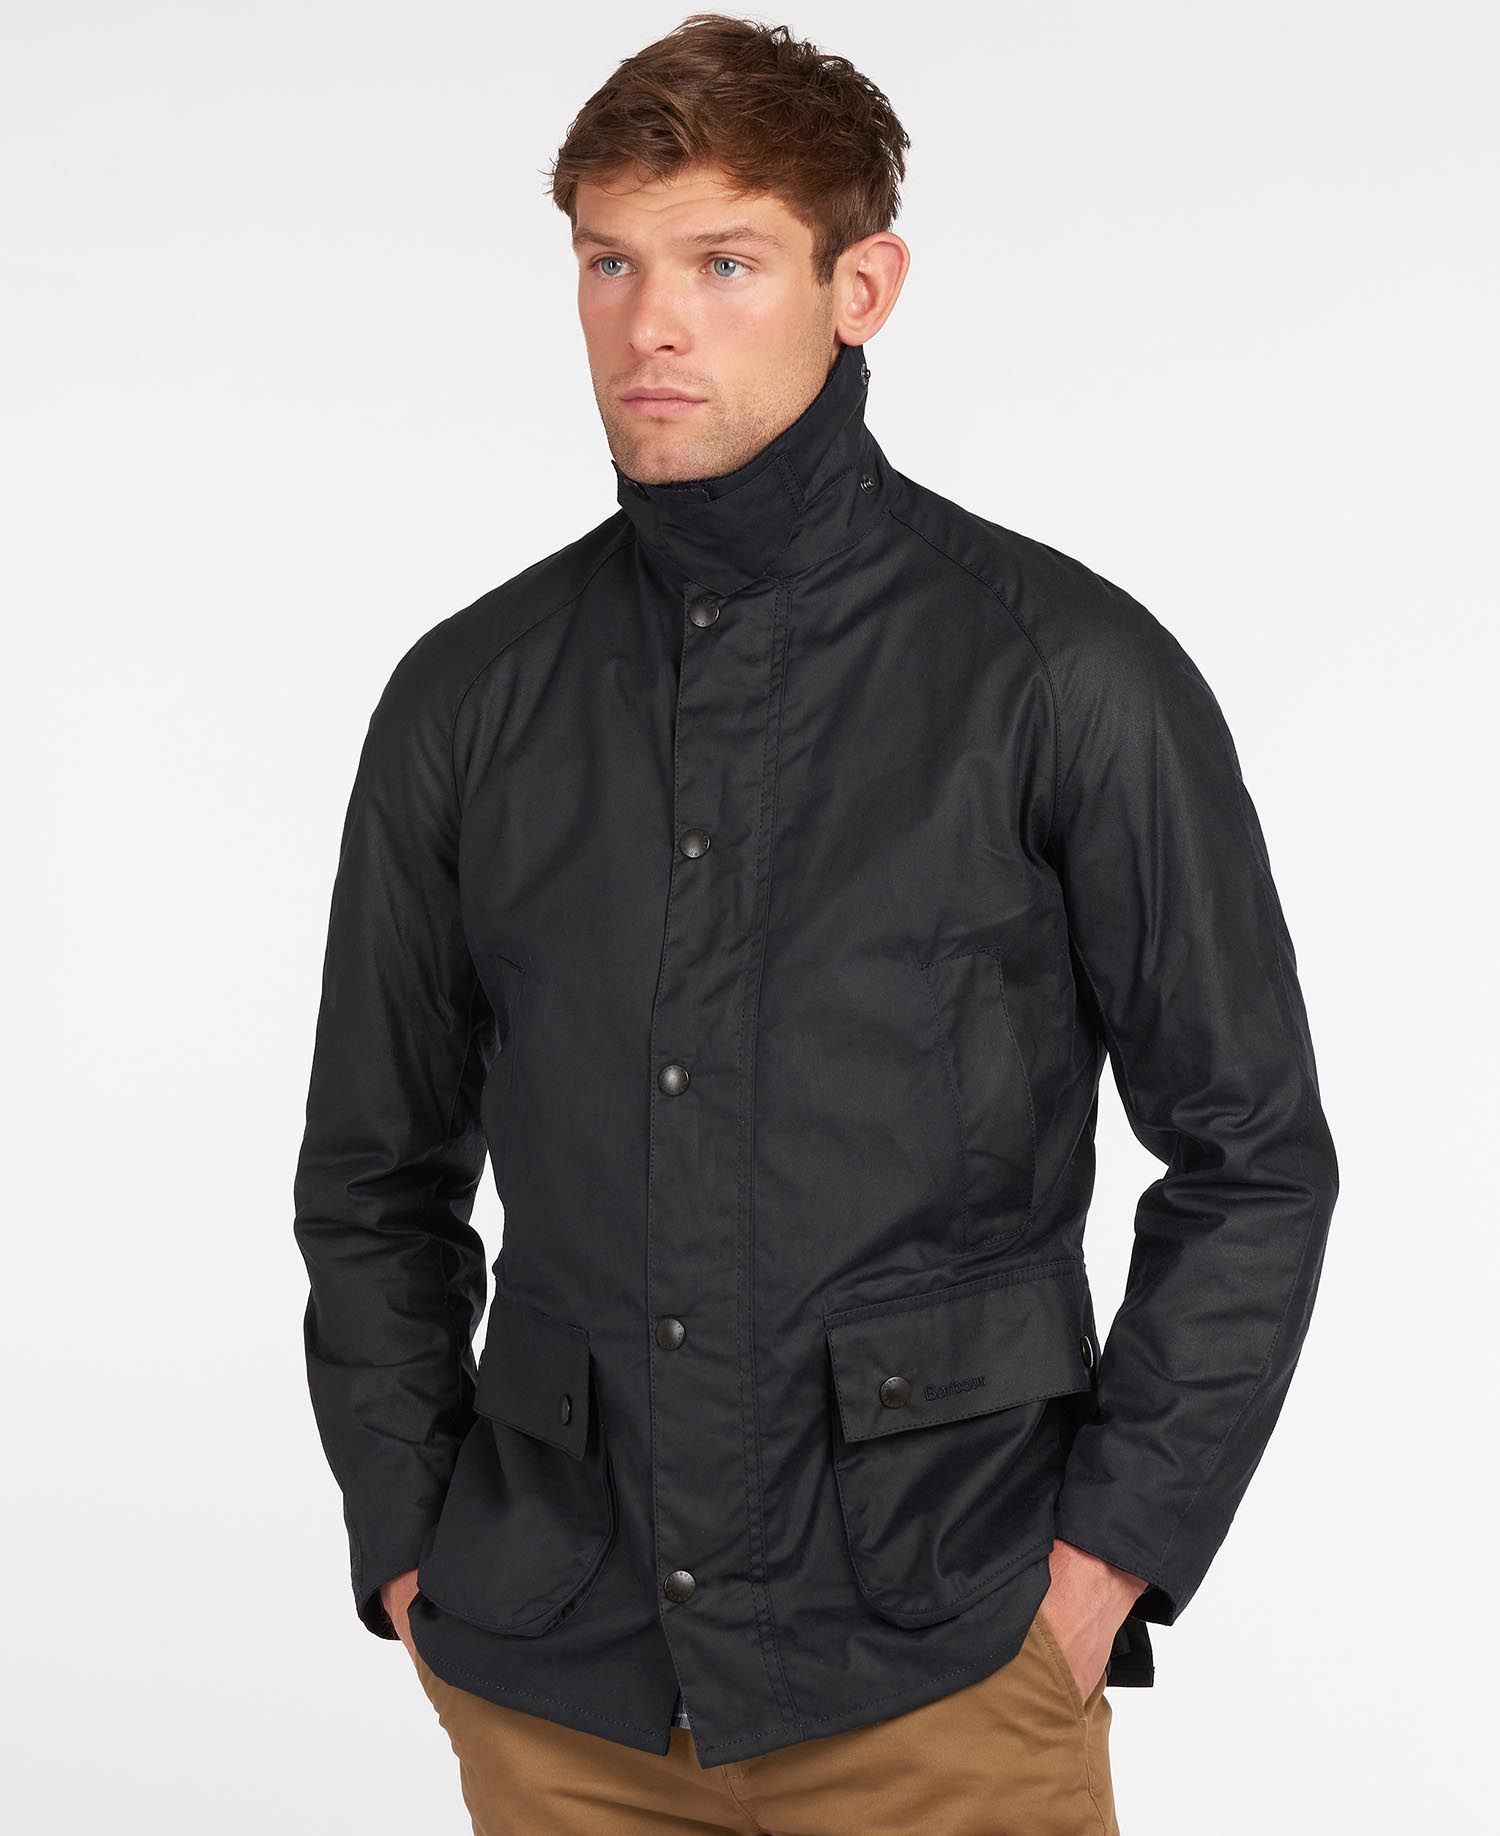 Unlock Wilderness' choice in the Barbour Vs North Face comparison, the Ashby Wax Jacket by Barbour